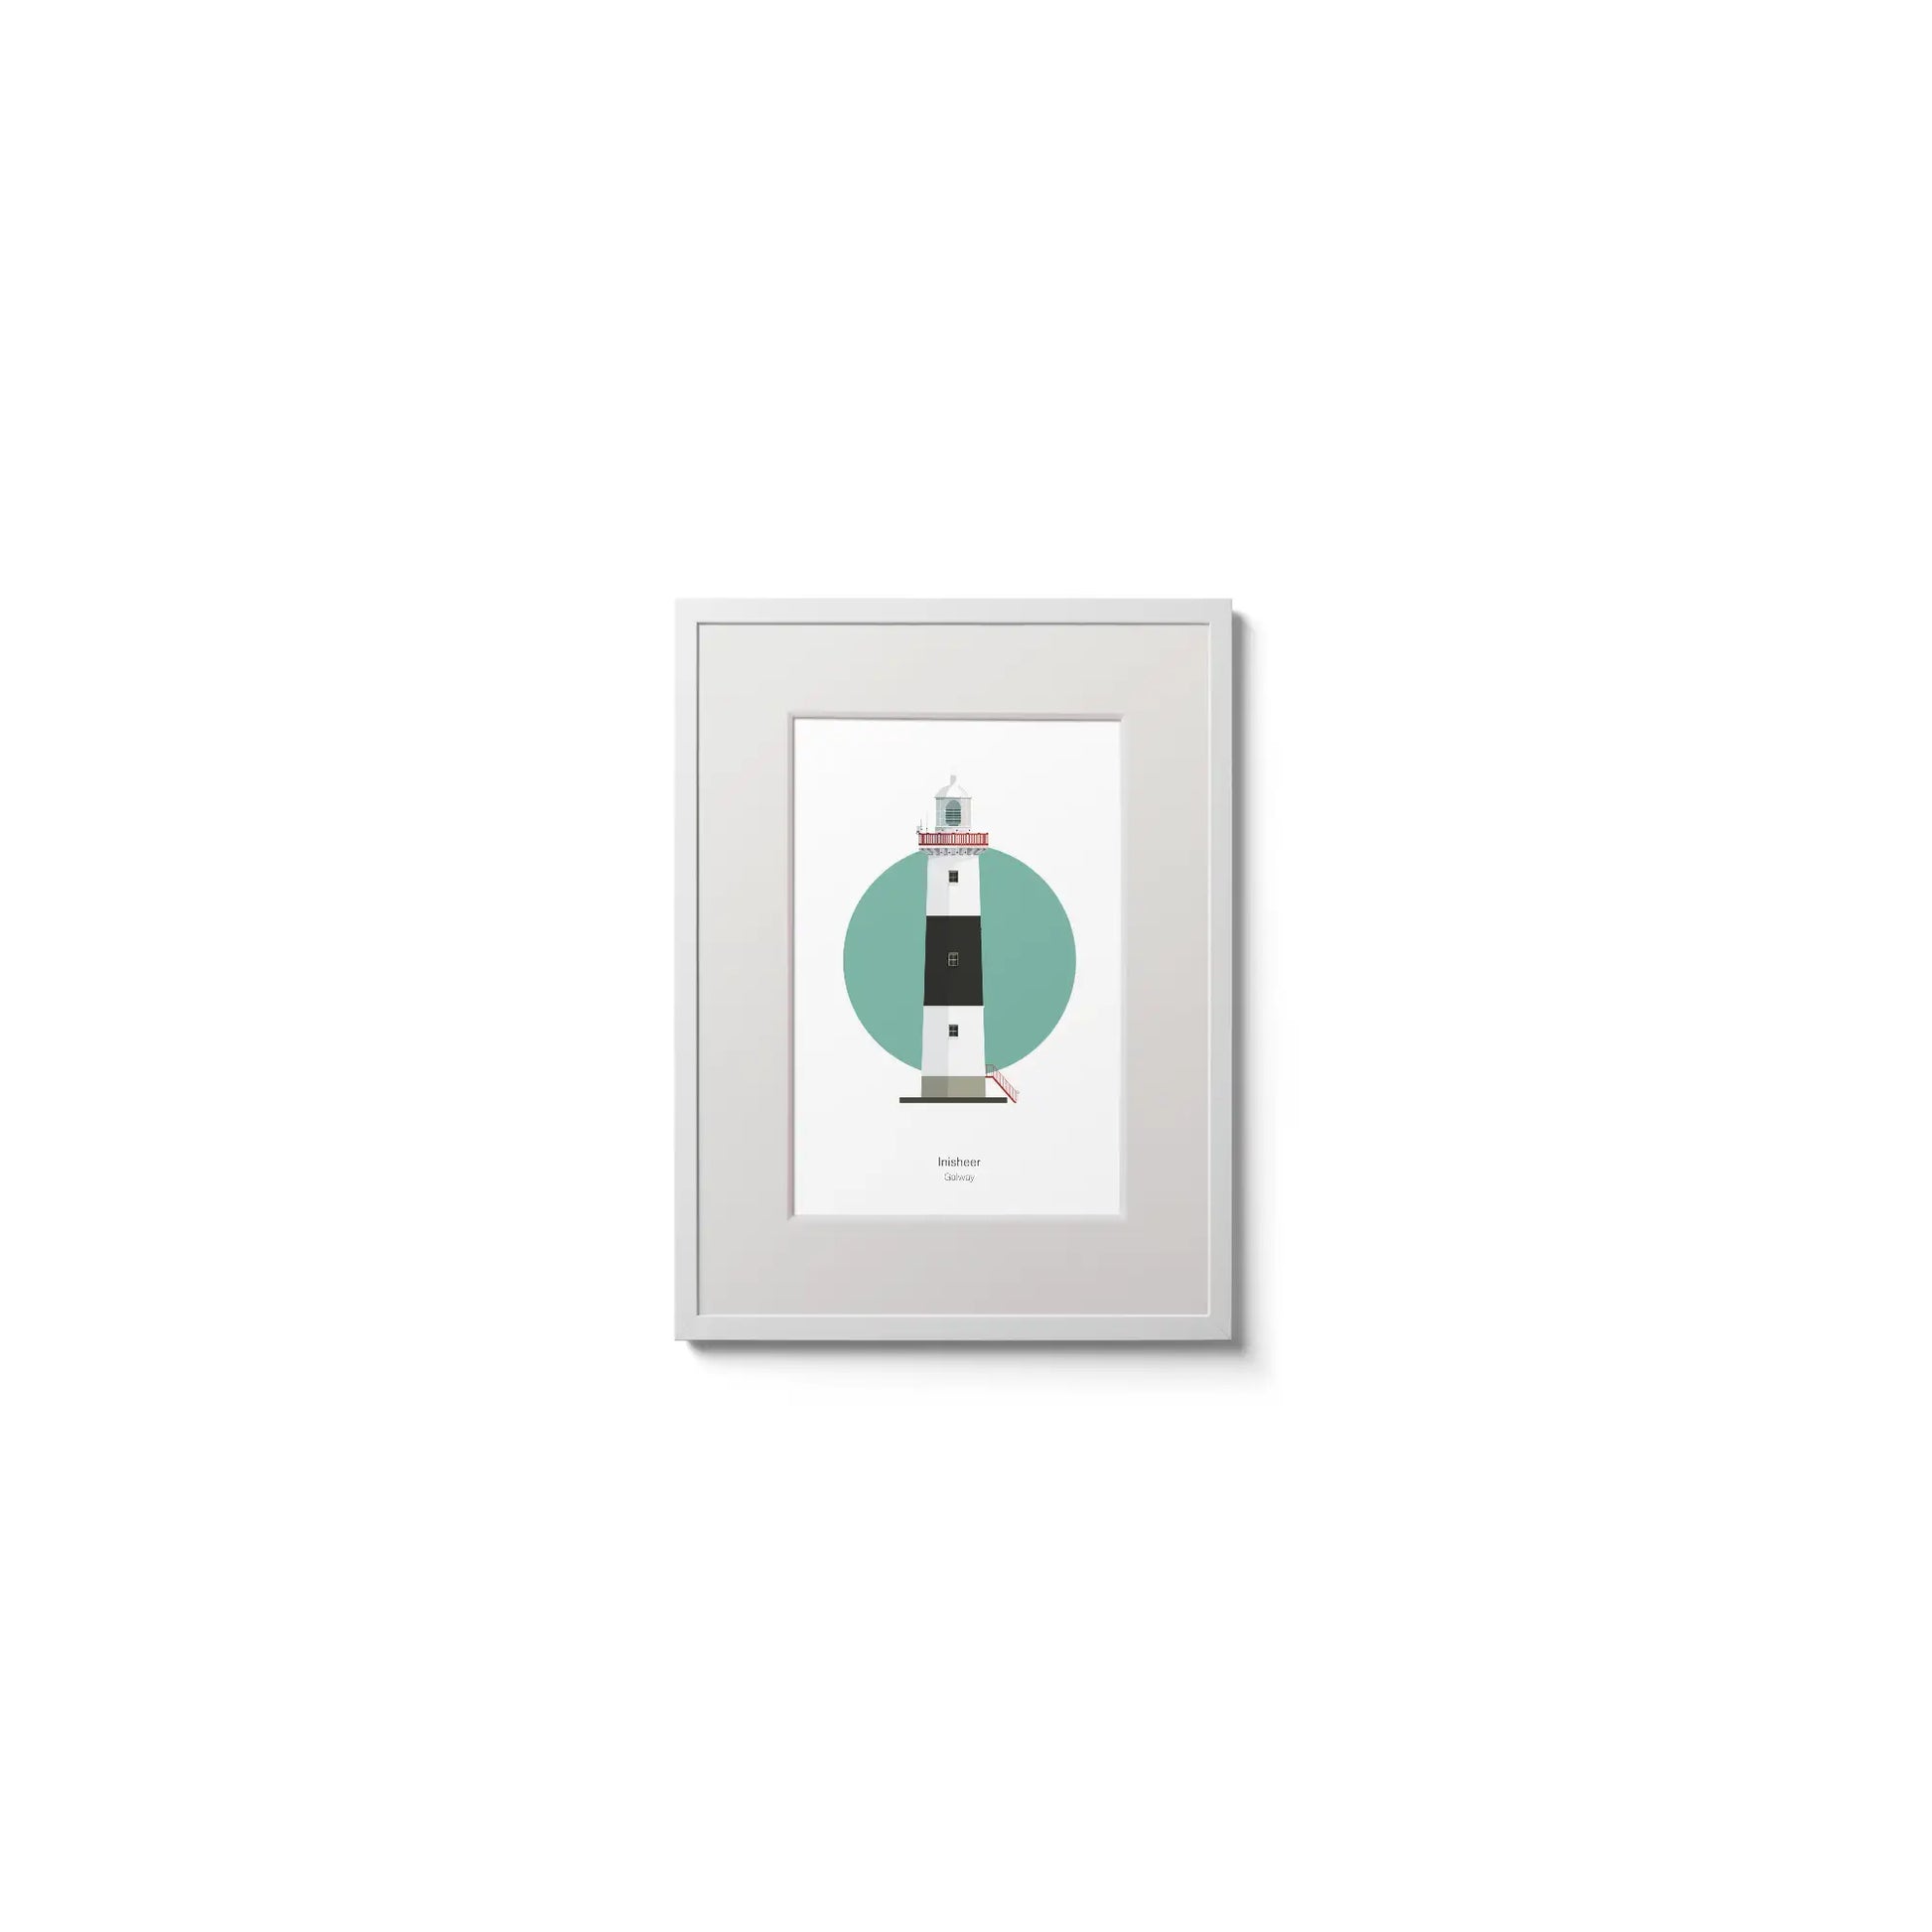 Contemporary wall hanging of Inisheer lighthouse on a white background inside light blue square,  in a white frame measuring 15x20cm.